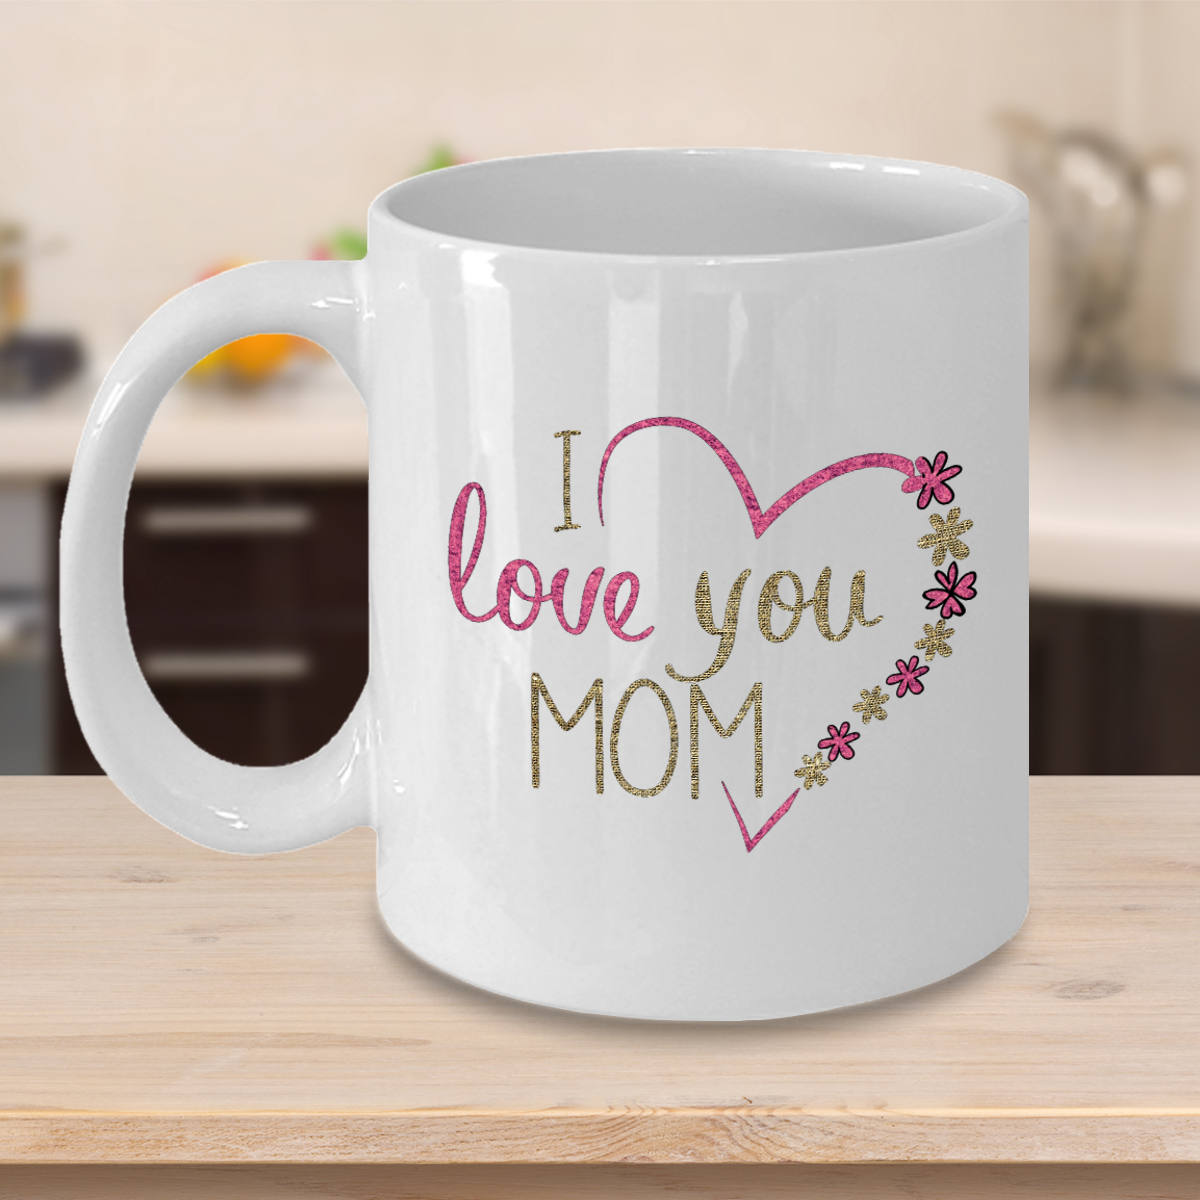 http://trendygearshop.com/wp-content/uploads/2019/12/happy-mothers-day-to-best-mom-ever-with-mothers-day-mug-gift-for-mom-from-daughter-or-from-son-gift-for-her-as-coffee-mug-is-1-mom-gift-5e078957.jpg